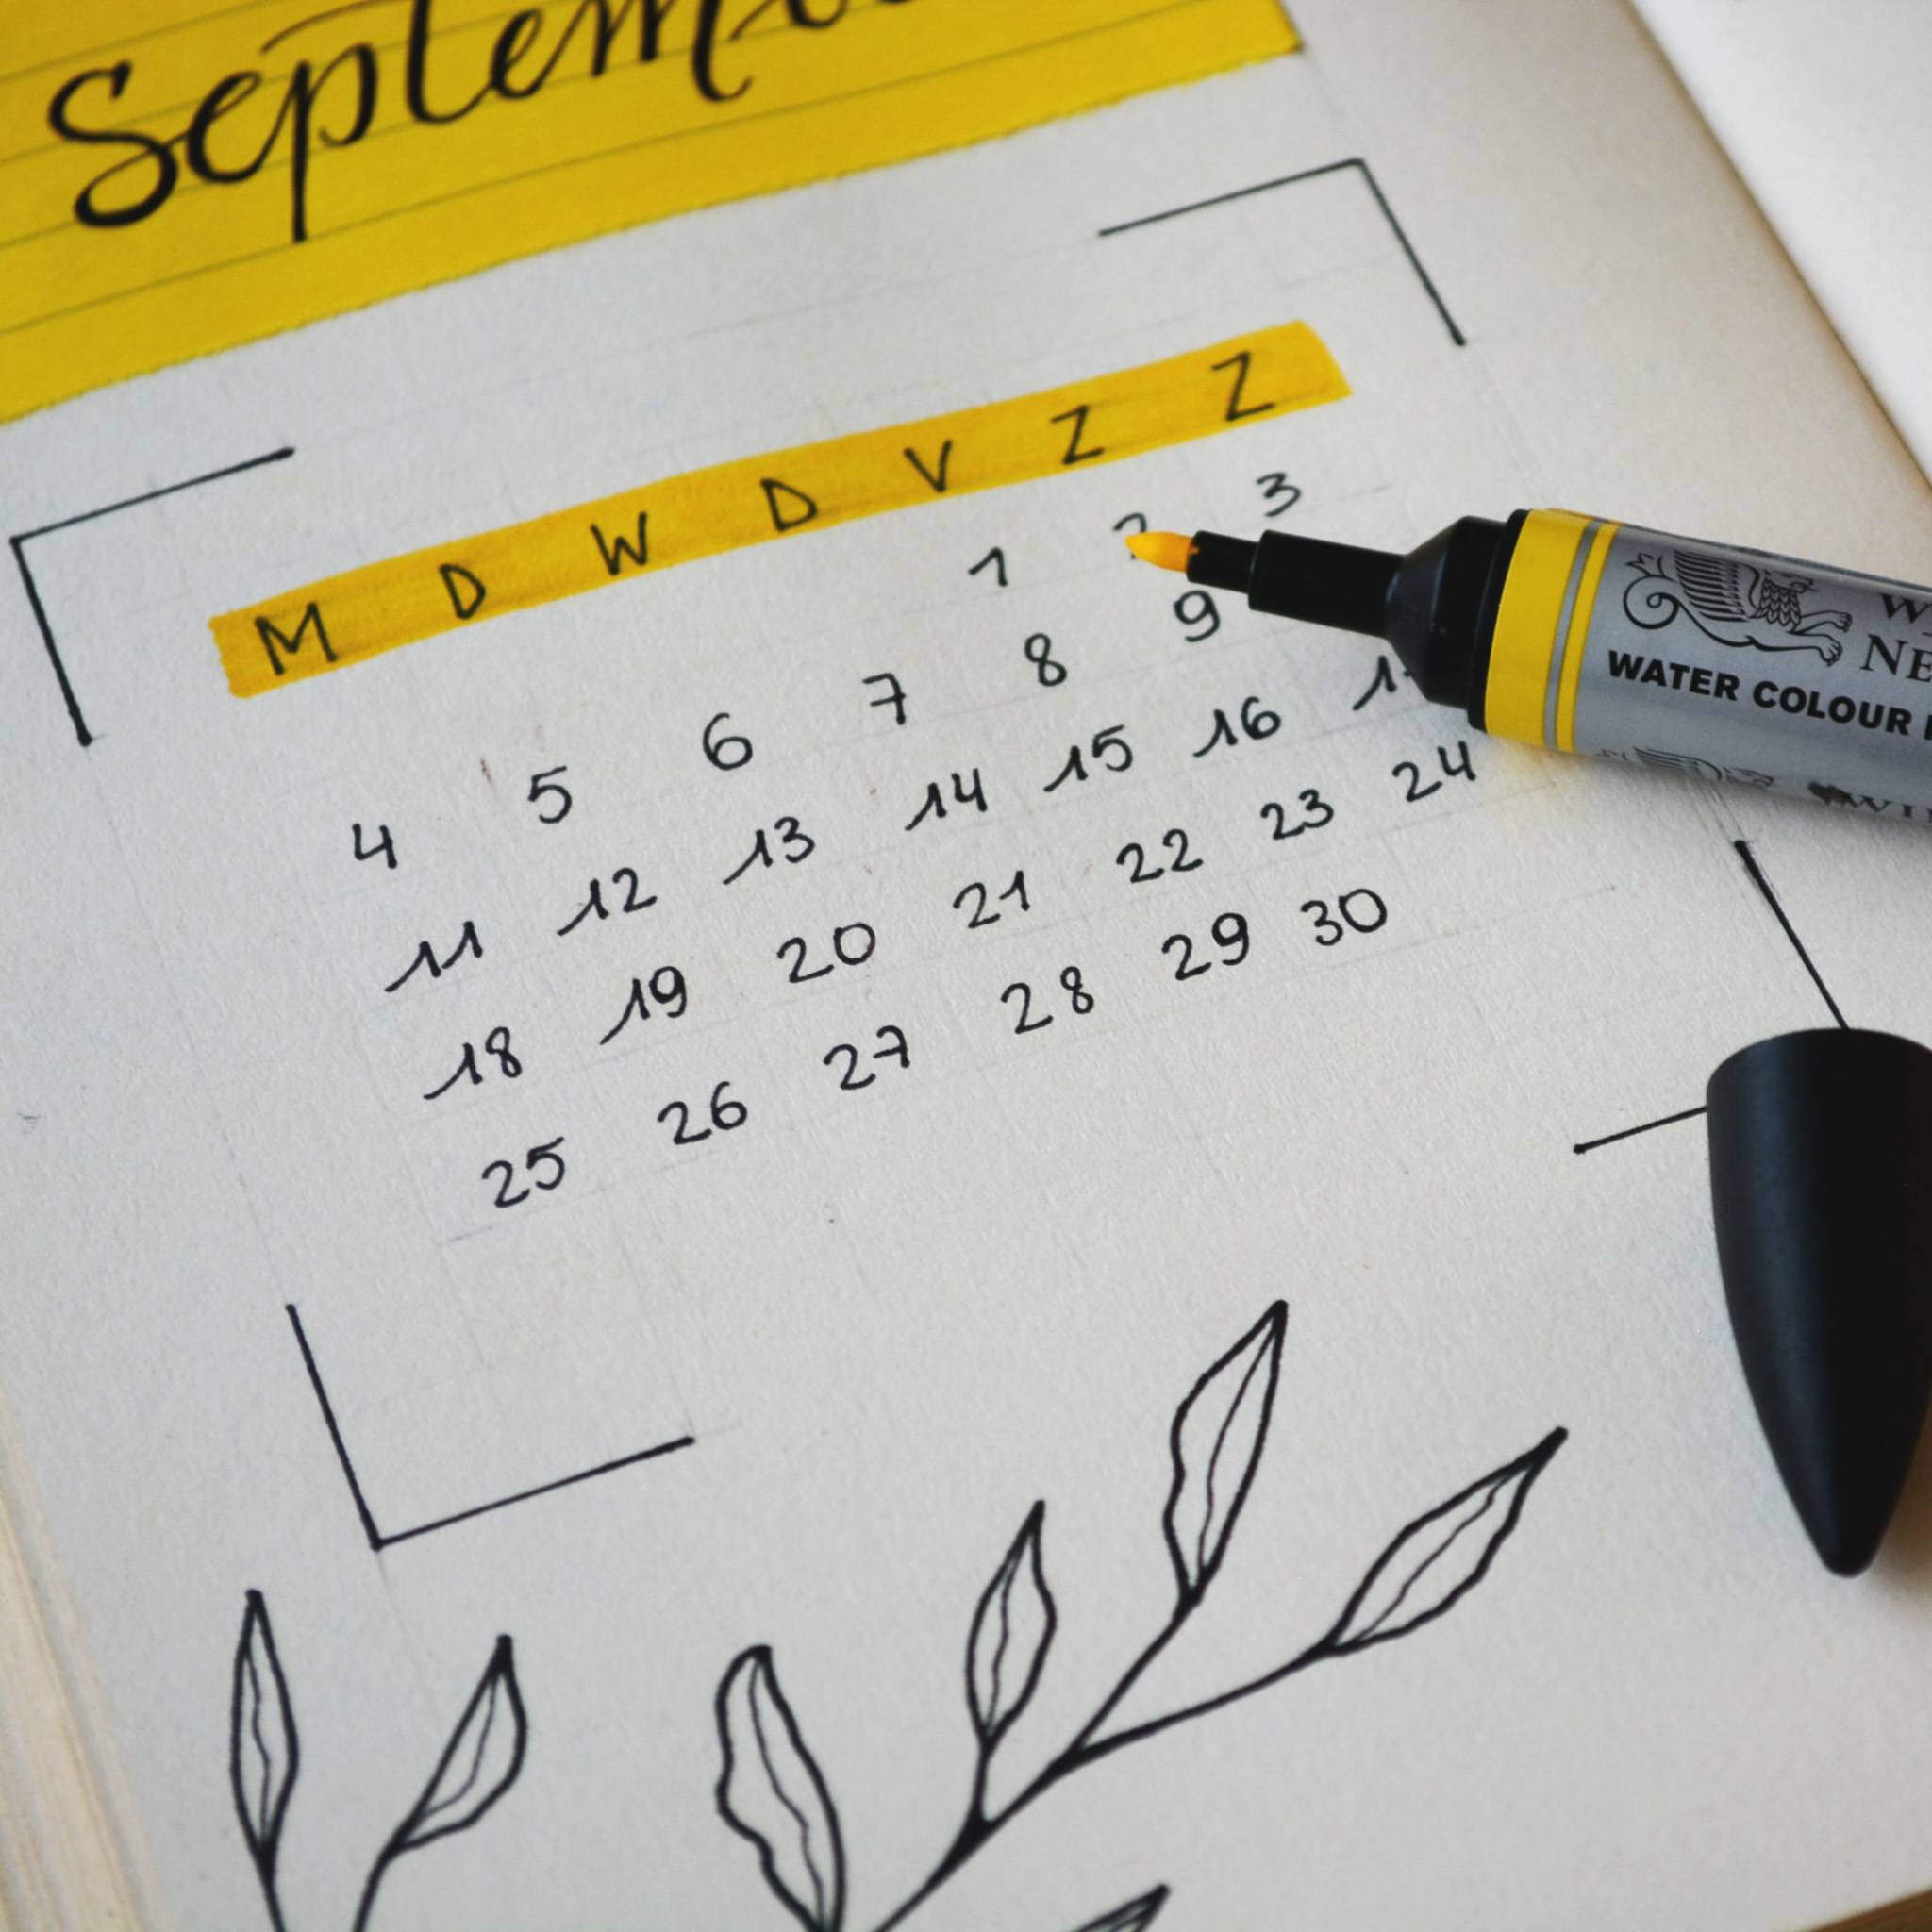 A calendar with some highlighted dates